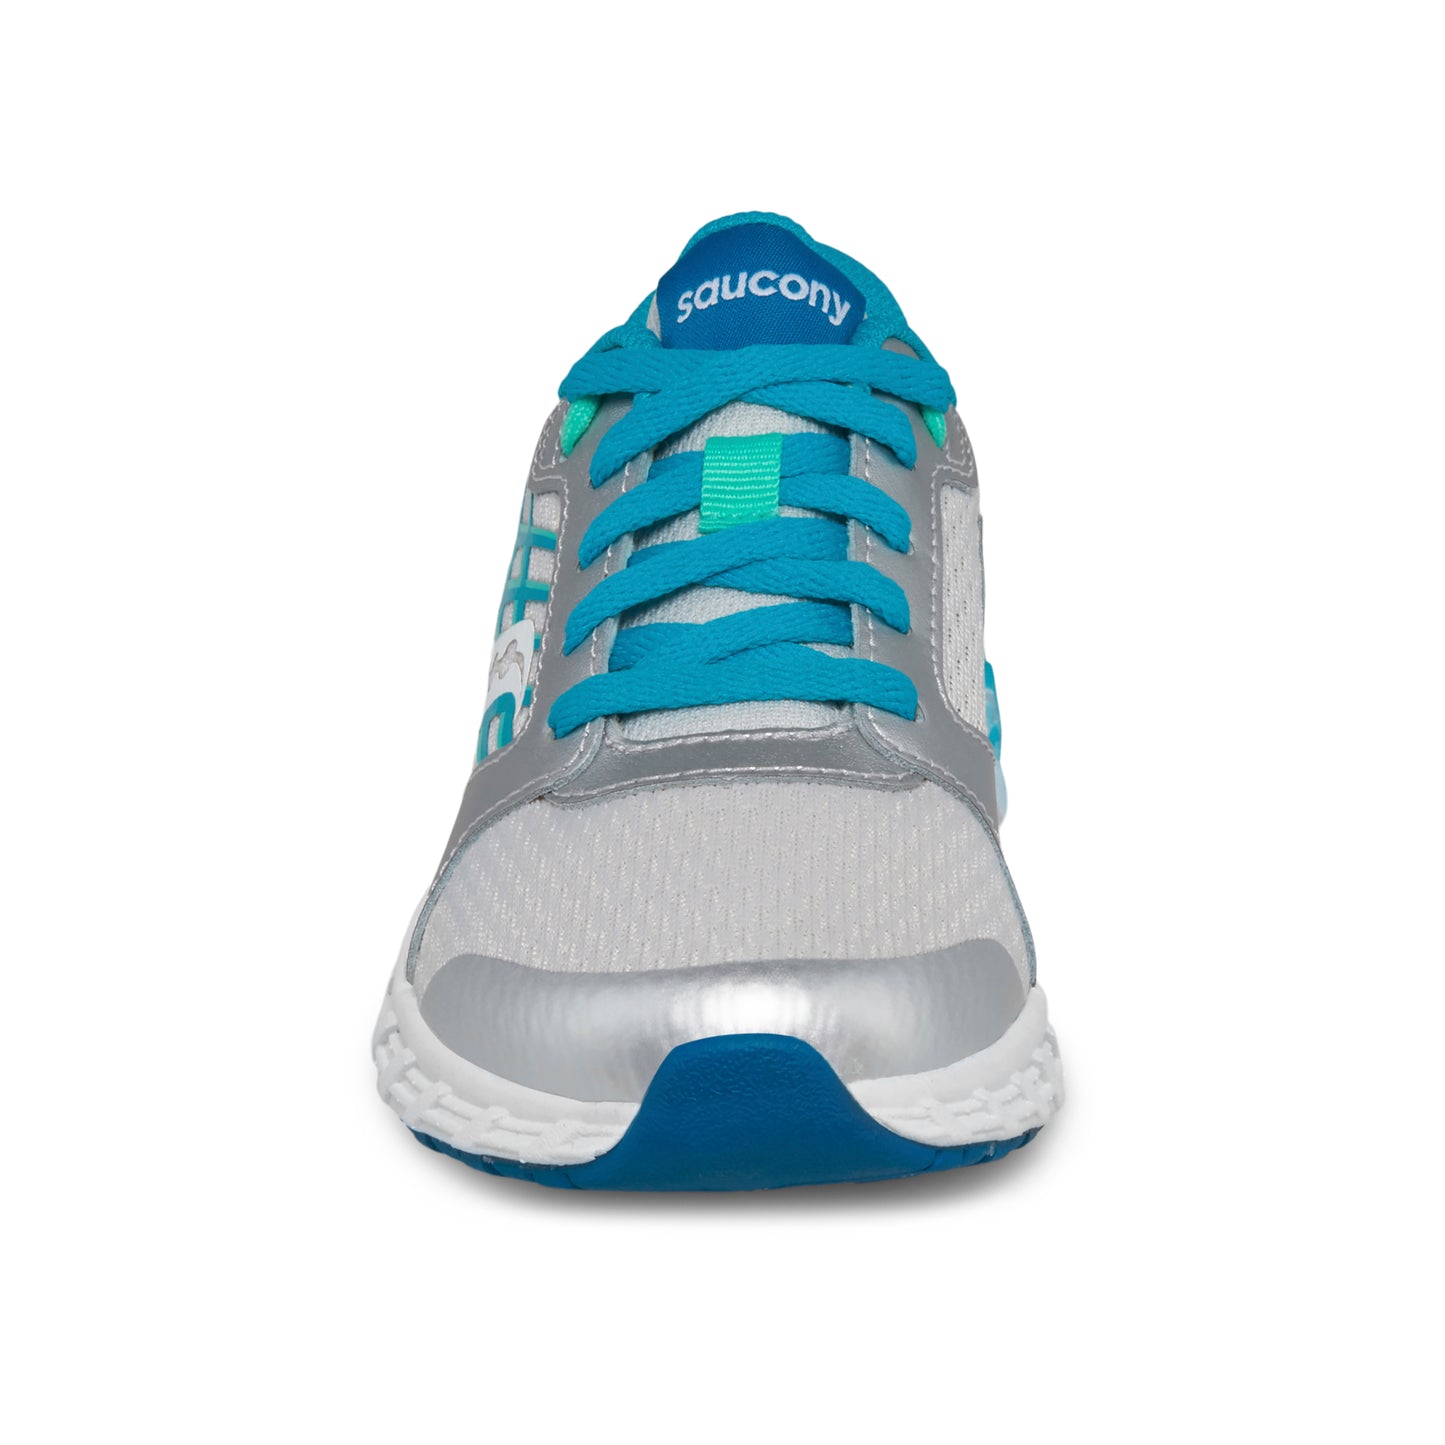 wind-20-sneaker-bigkid-turquoise-silver__Turquoise/Silver_5